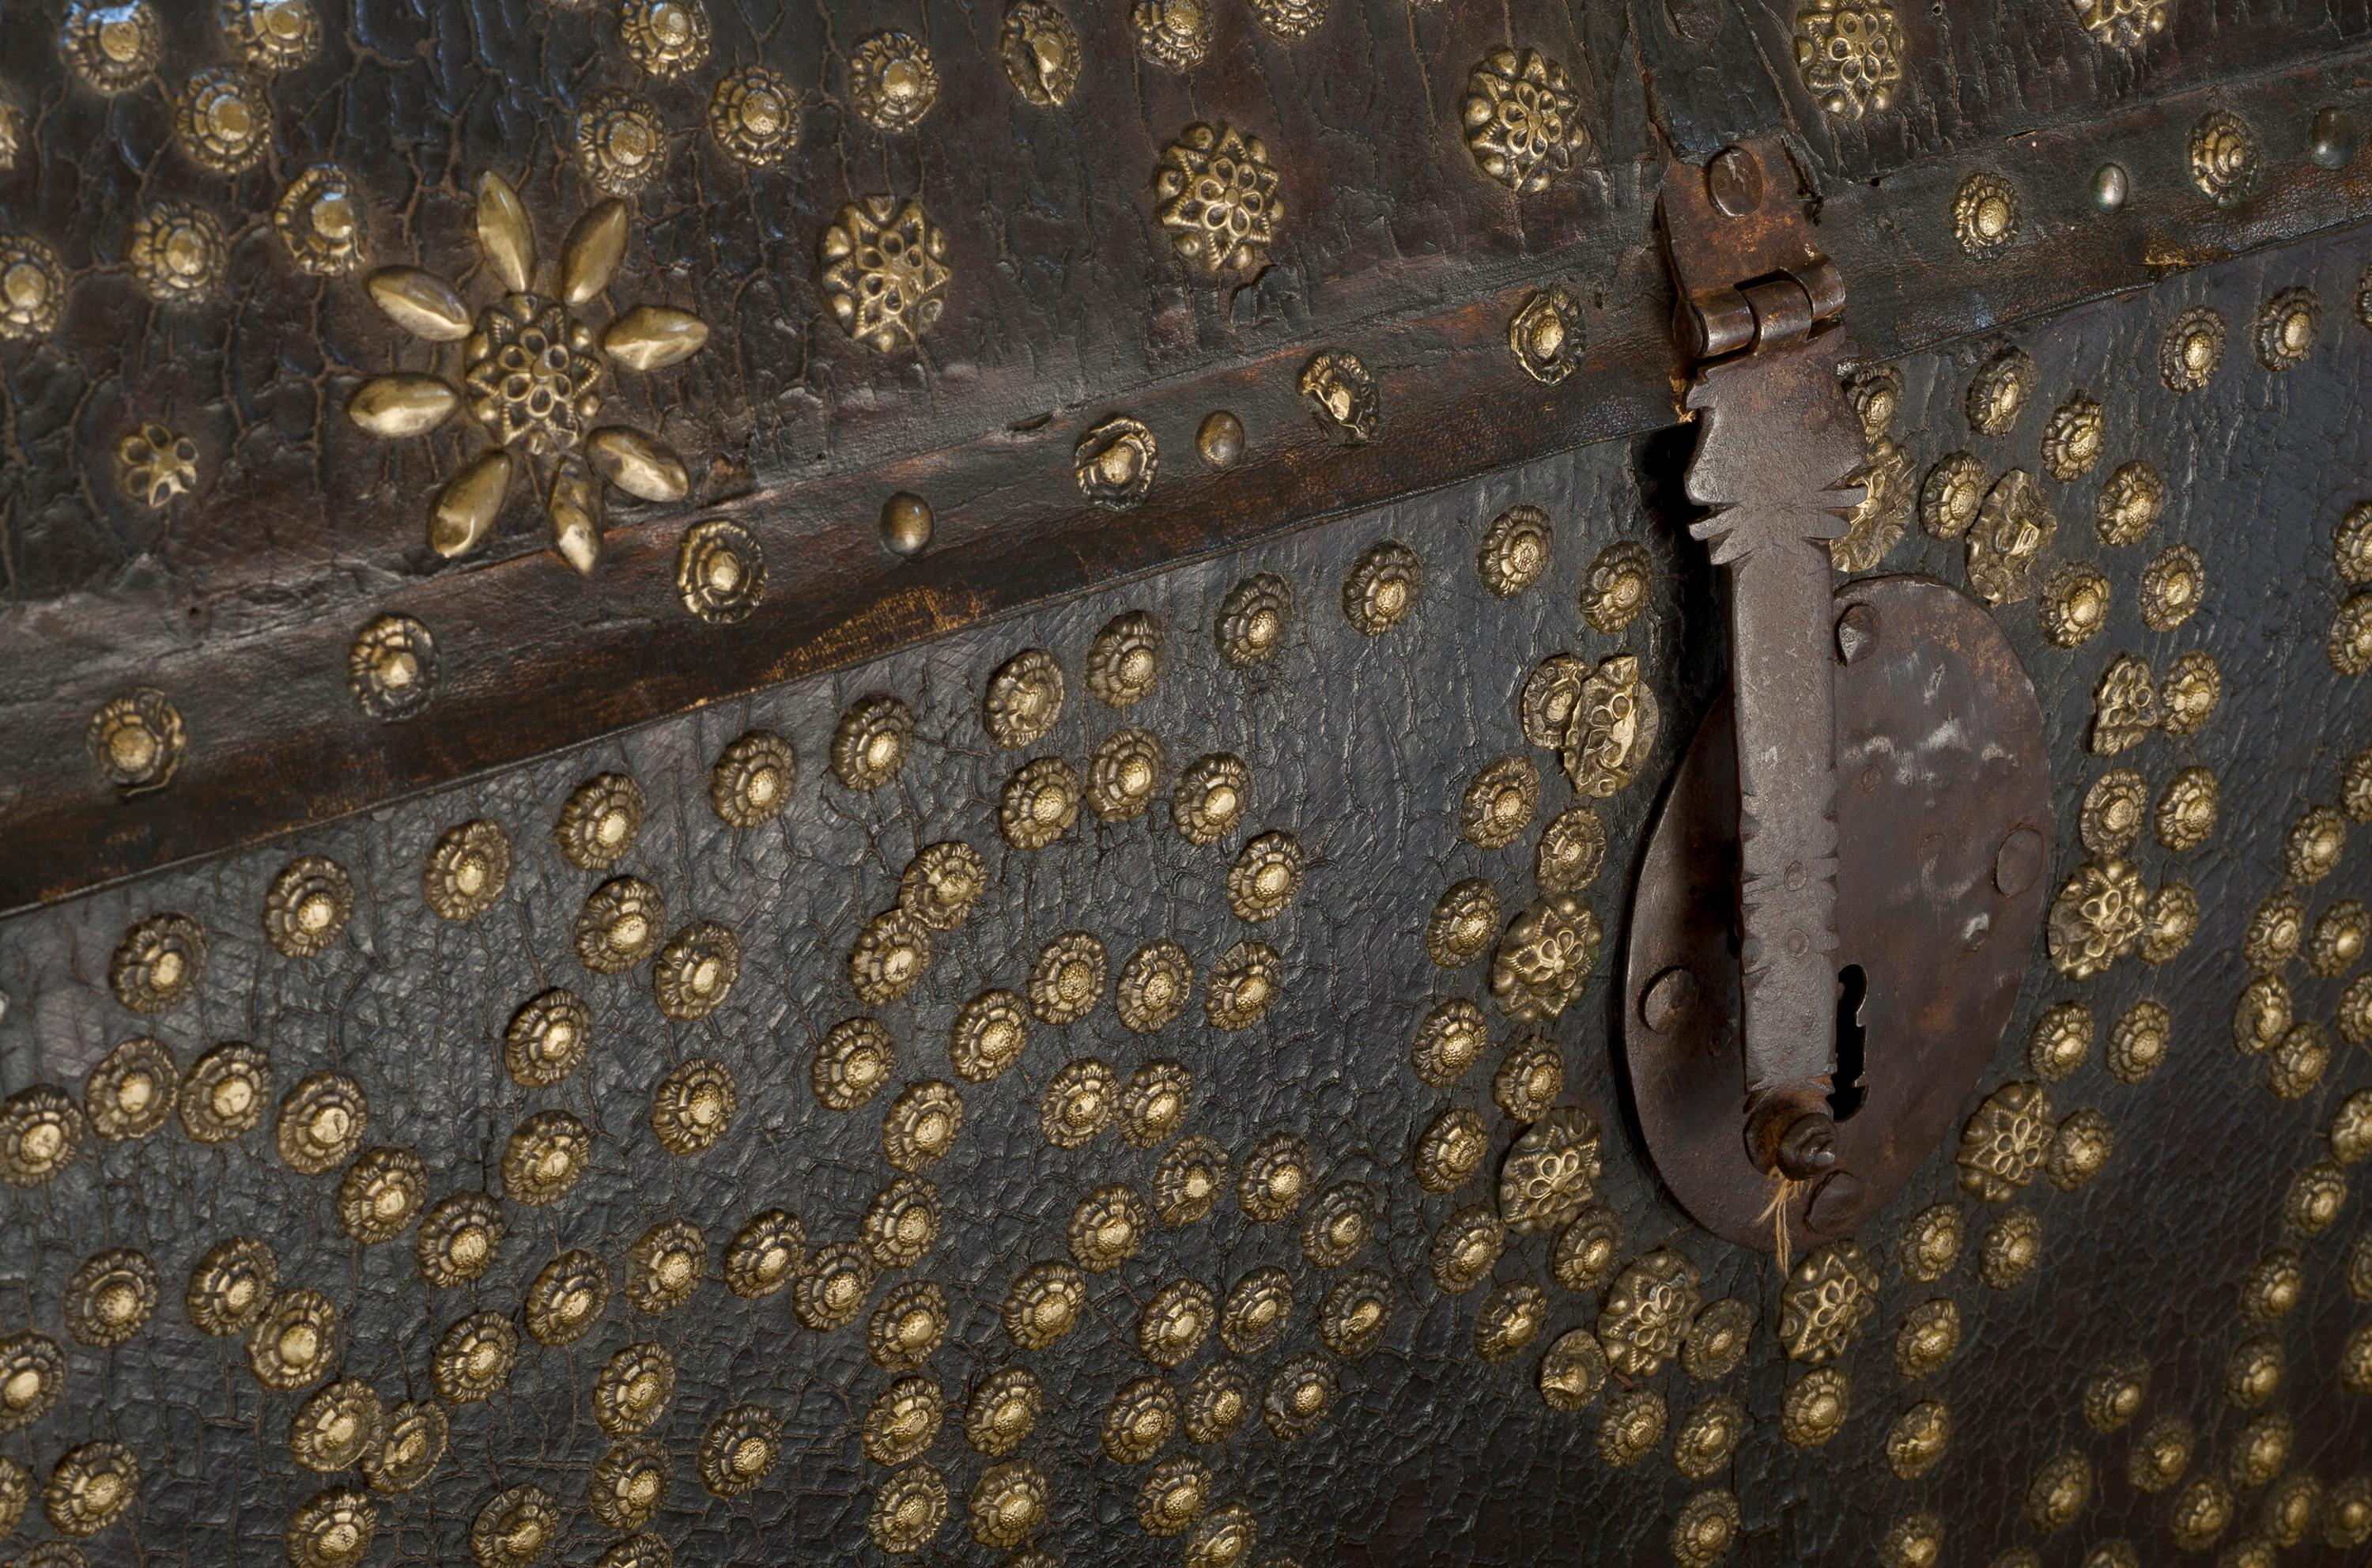 Wrought Iron Antique 18th Century Spanish Leather Trunk with Decorative Nailhead Detailing For Sale